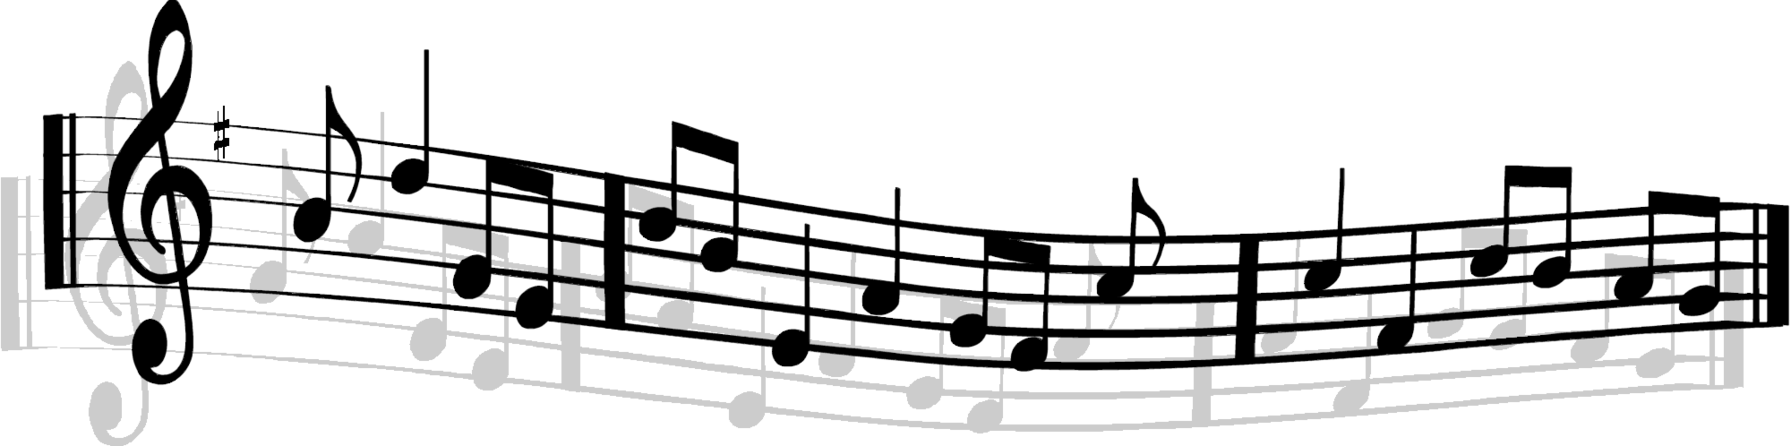 Music Staff Clipart - Free Clipart Images